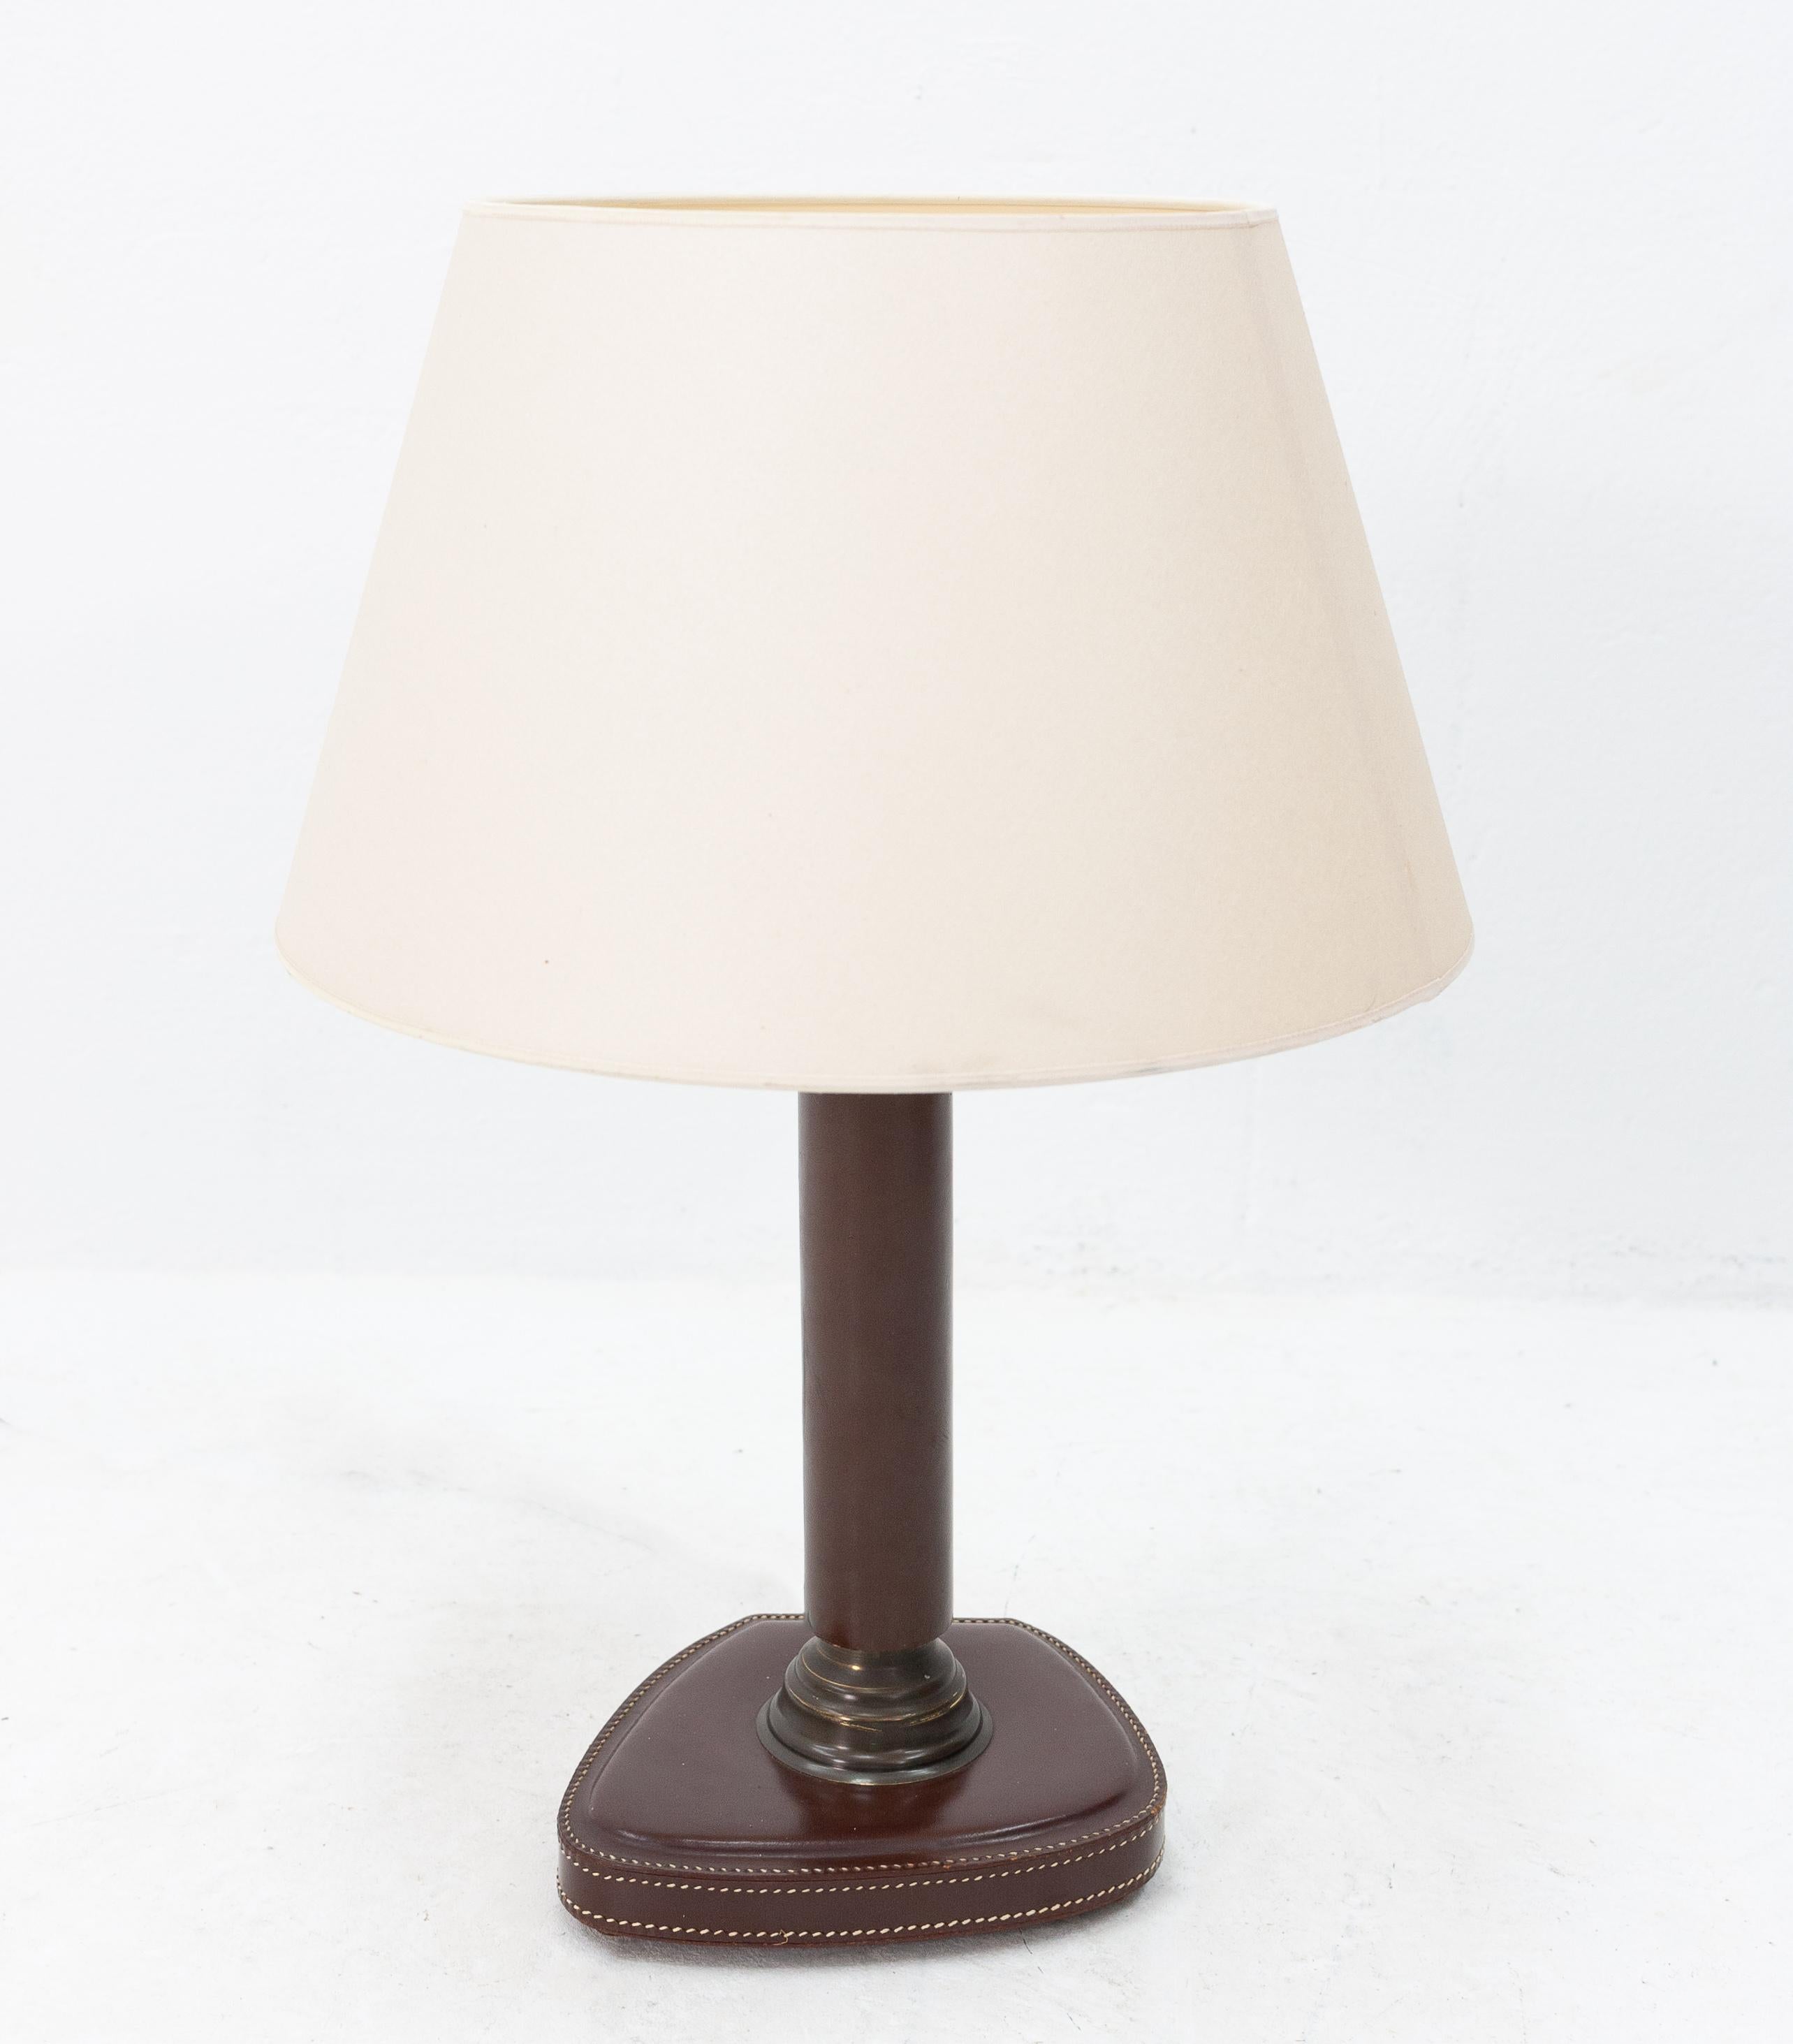 Mid-20th Century French Stitched Leather Desk Lamp